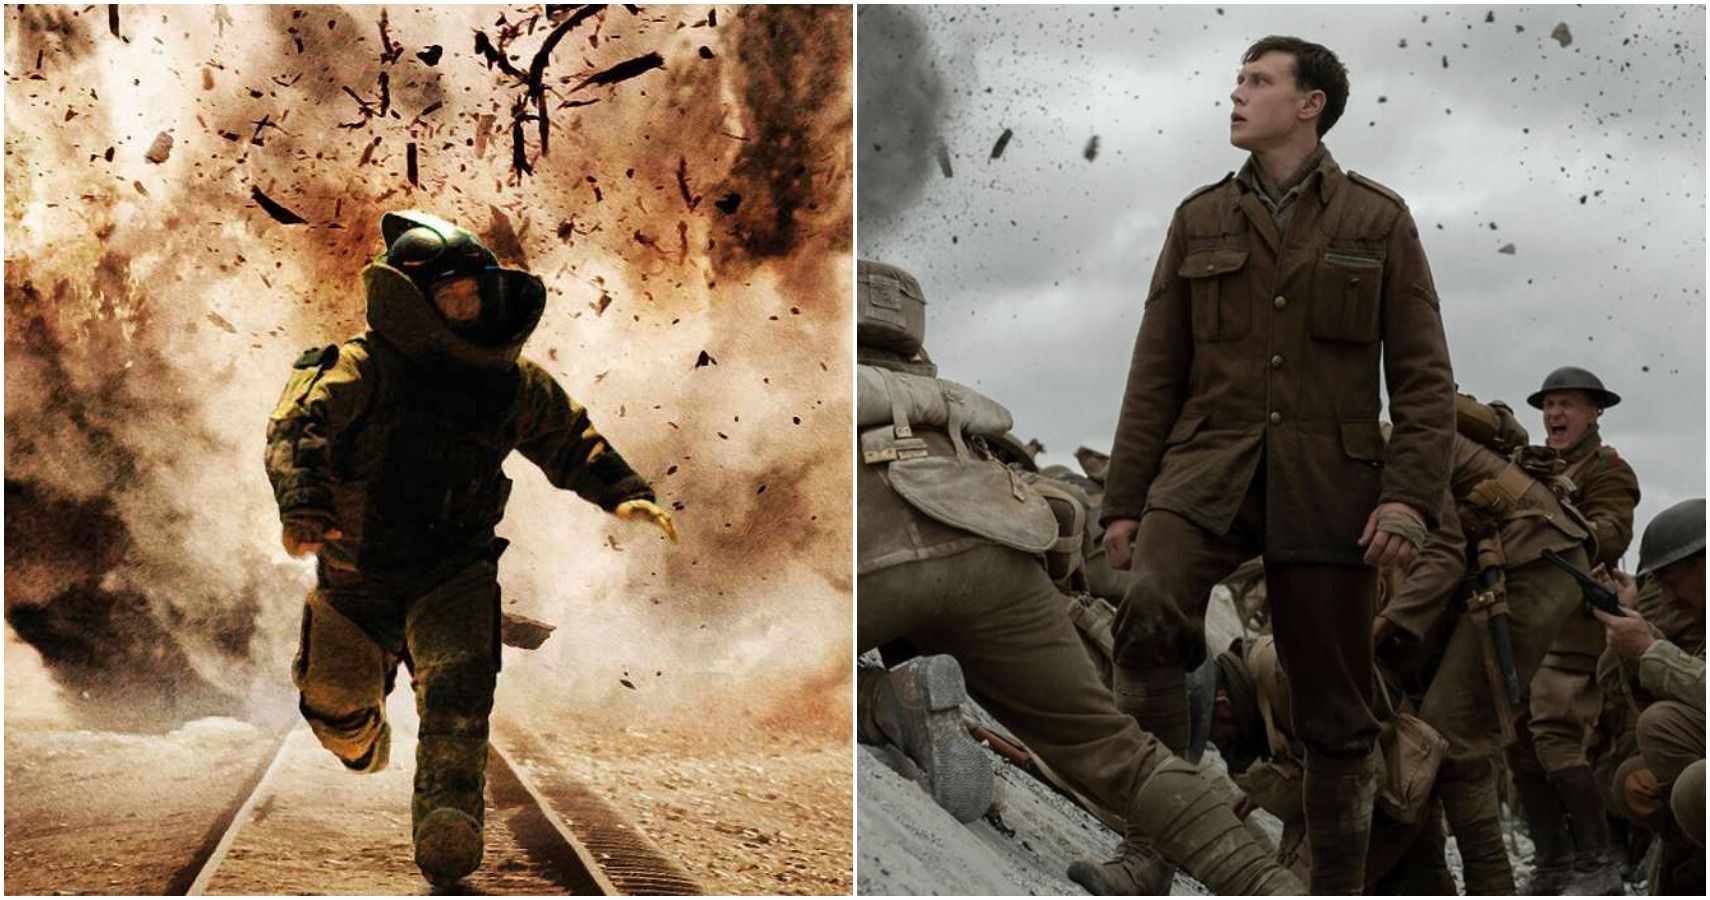 10 Of The Best War Movies Of All Time, Ranked According To Rotten Tomatoes